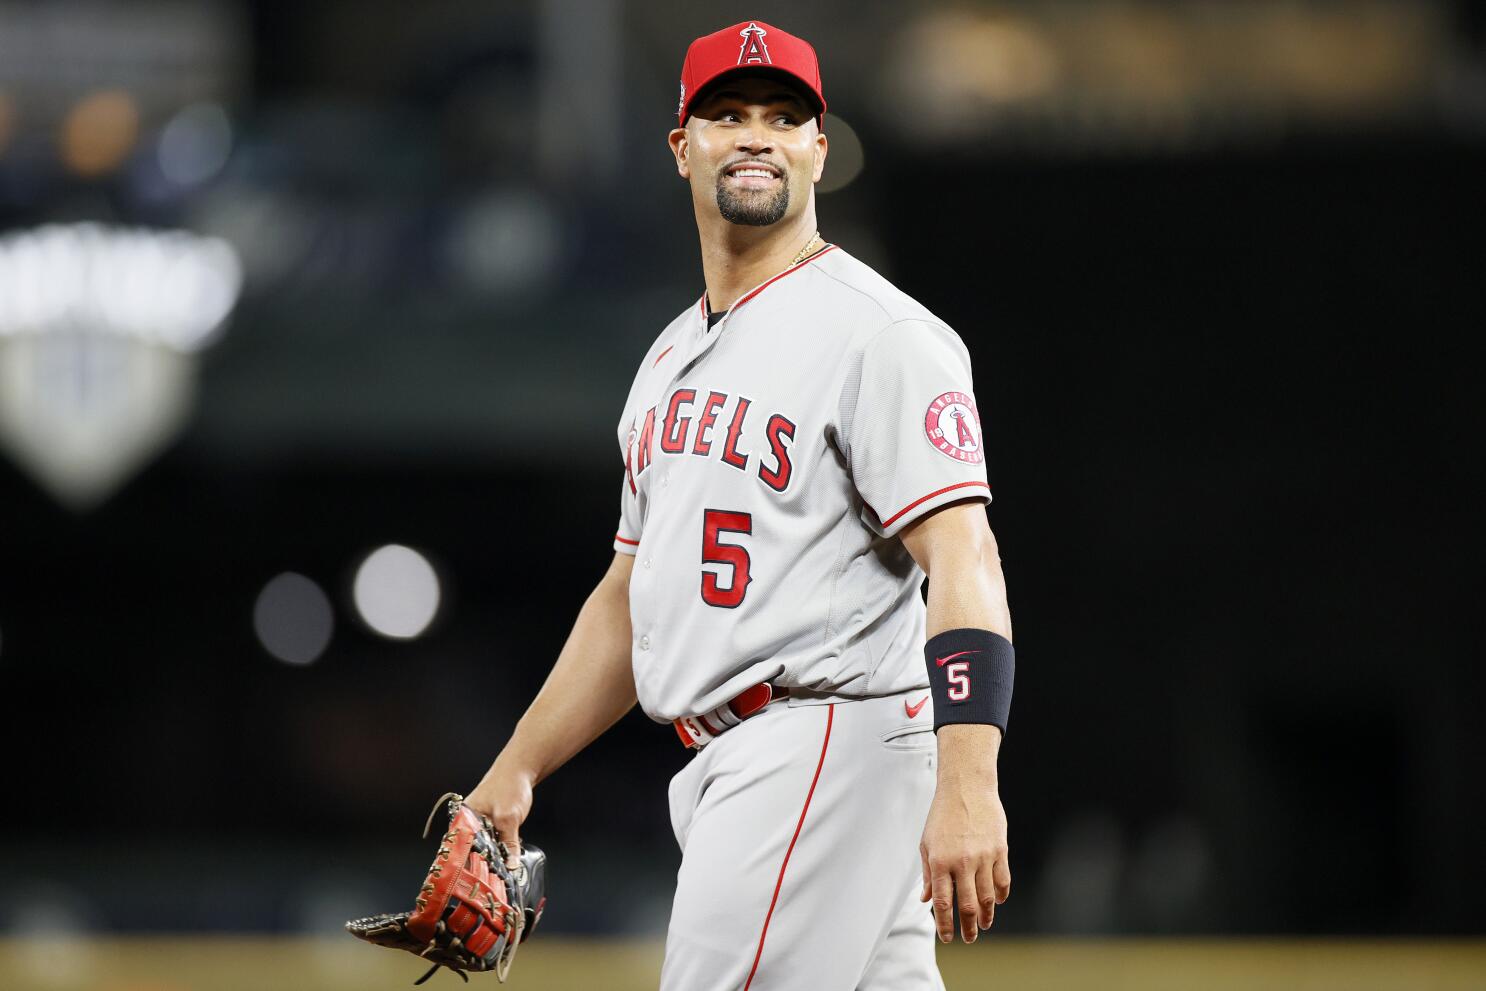 Dodgers Dugout: Here's why the Albert Pujols signing makes sense